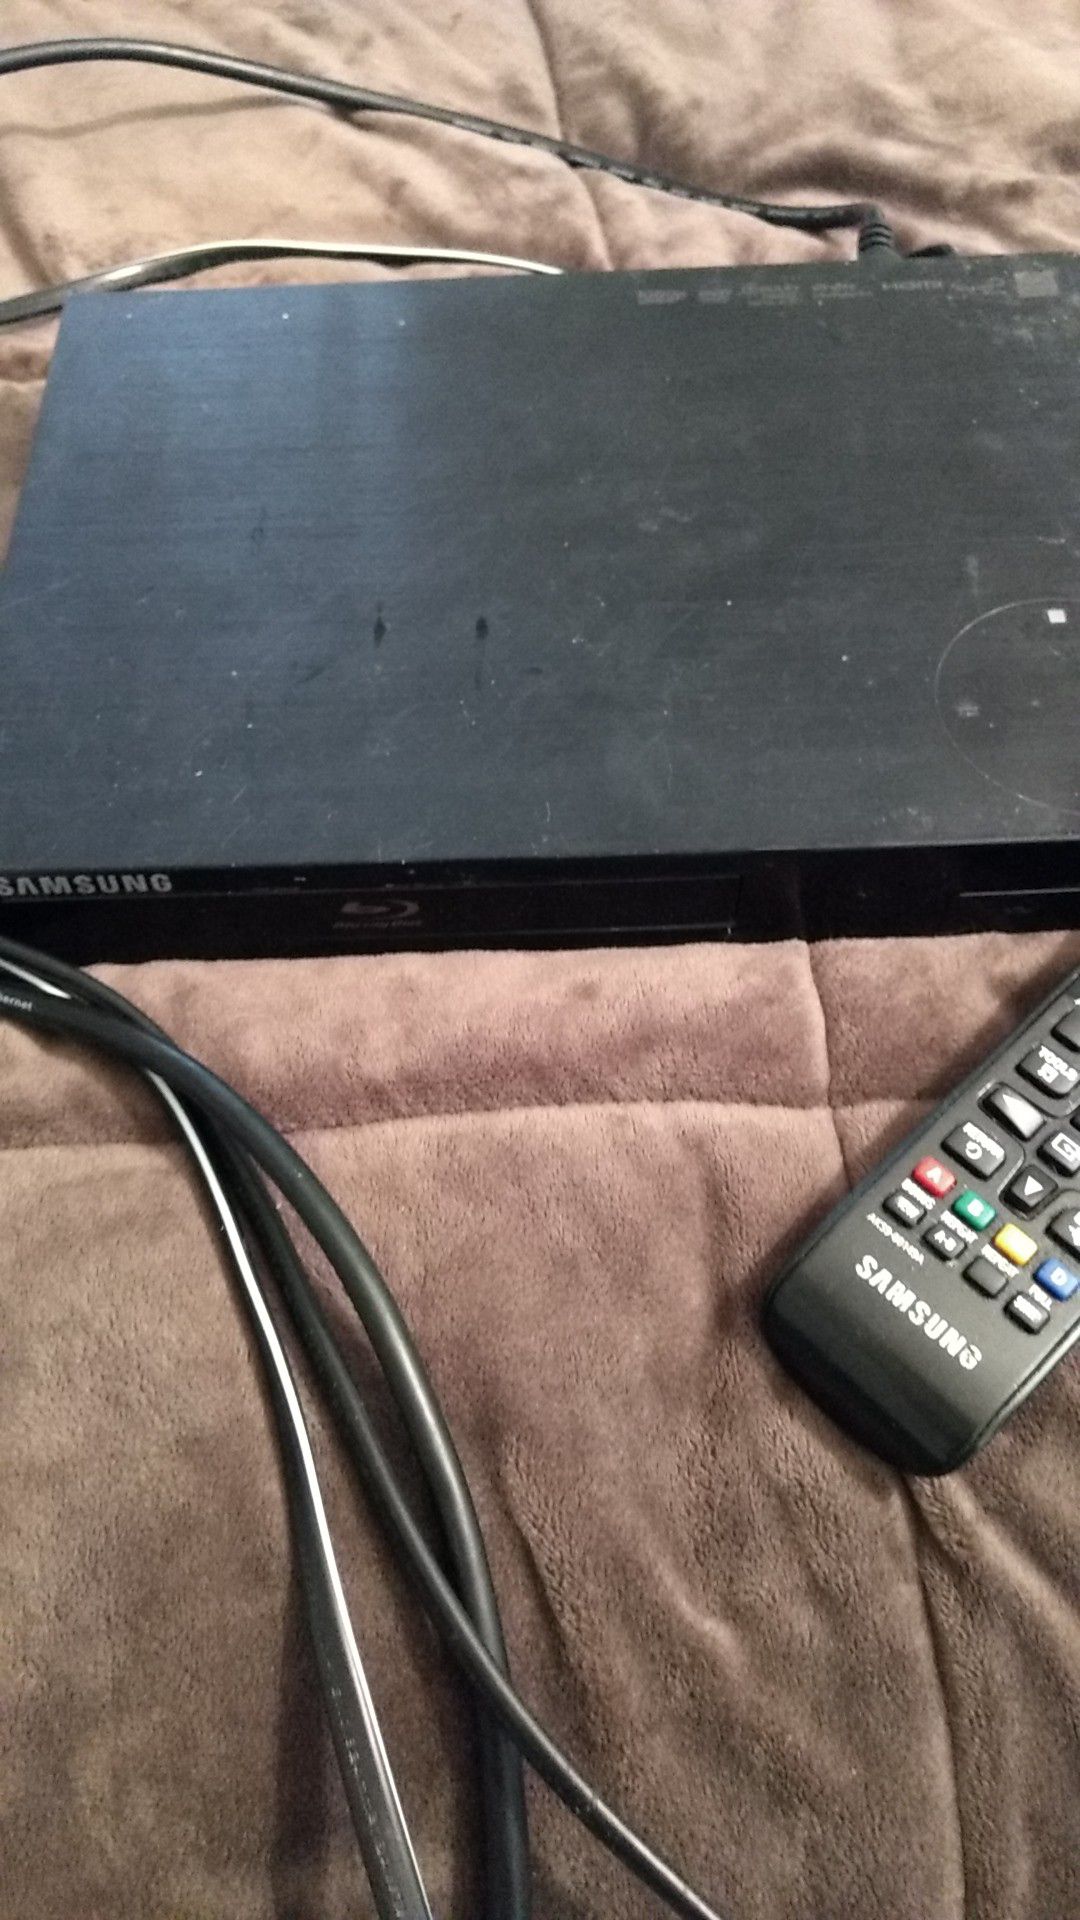 Samsung DVD player with remote and HDMI cable